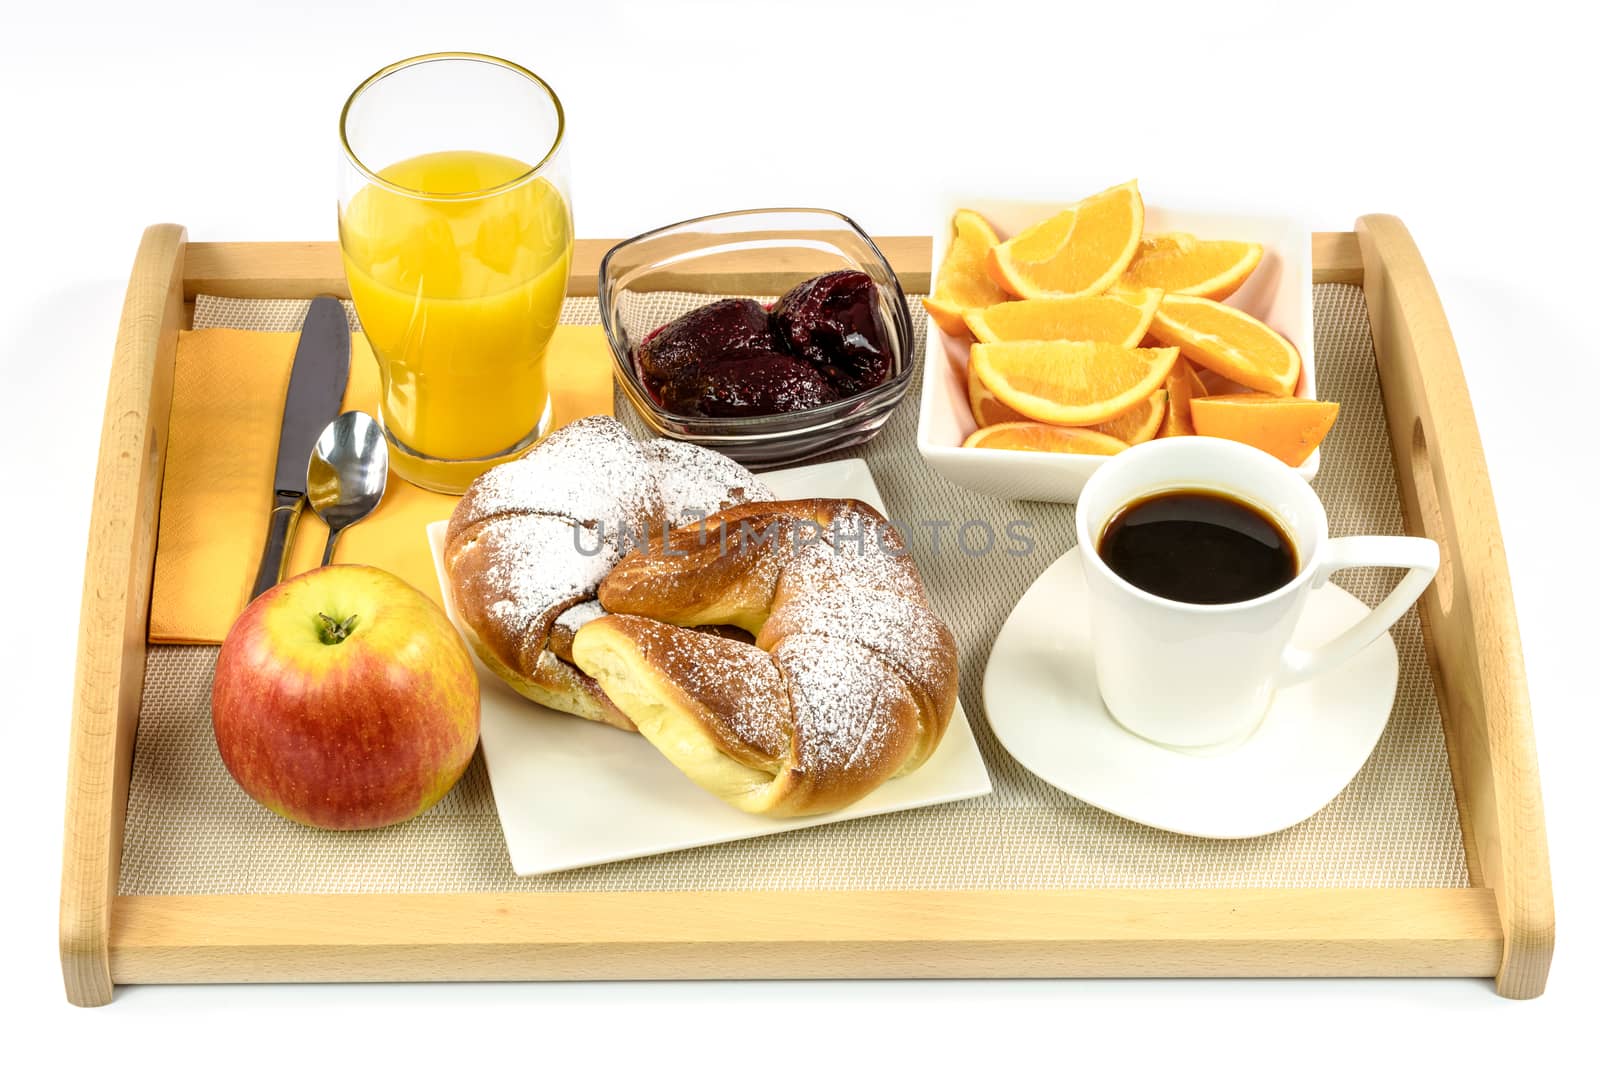 Overhead shot on hotel's breakfast tray with croissants, coffee, oranges, juice, jam, apple and cutlery